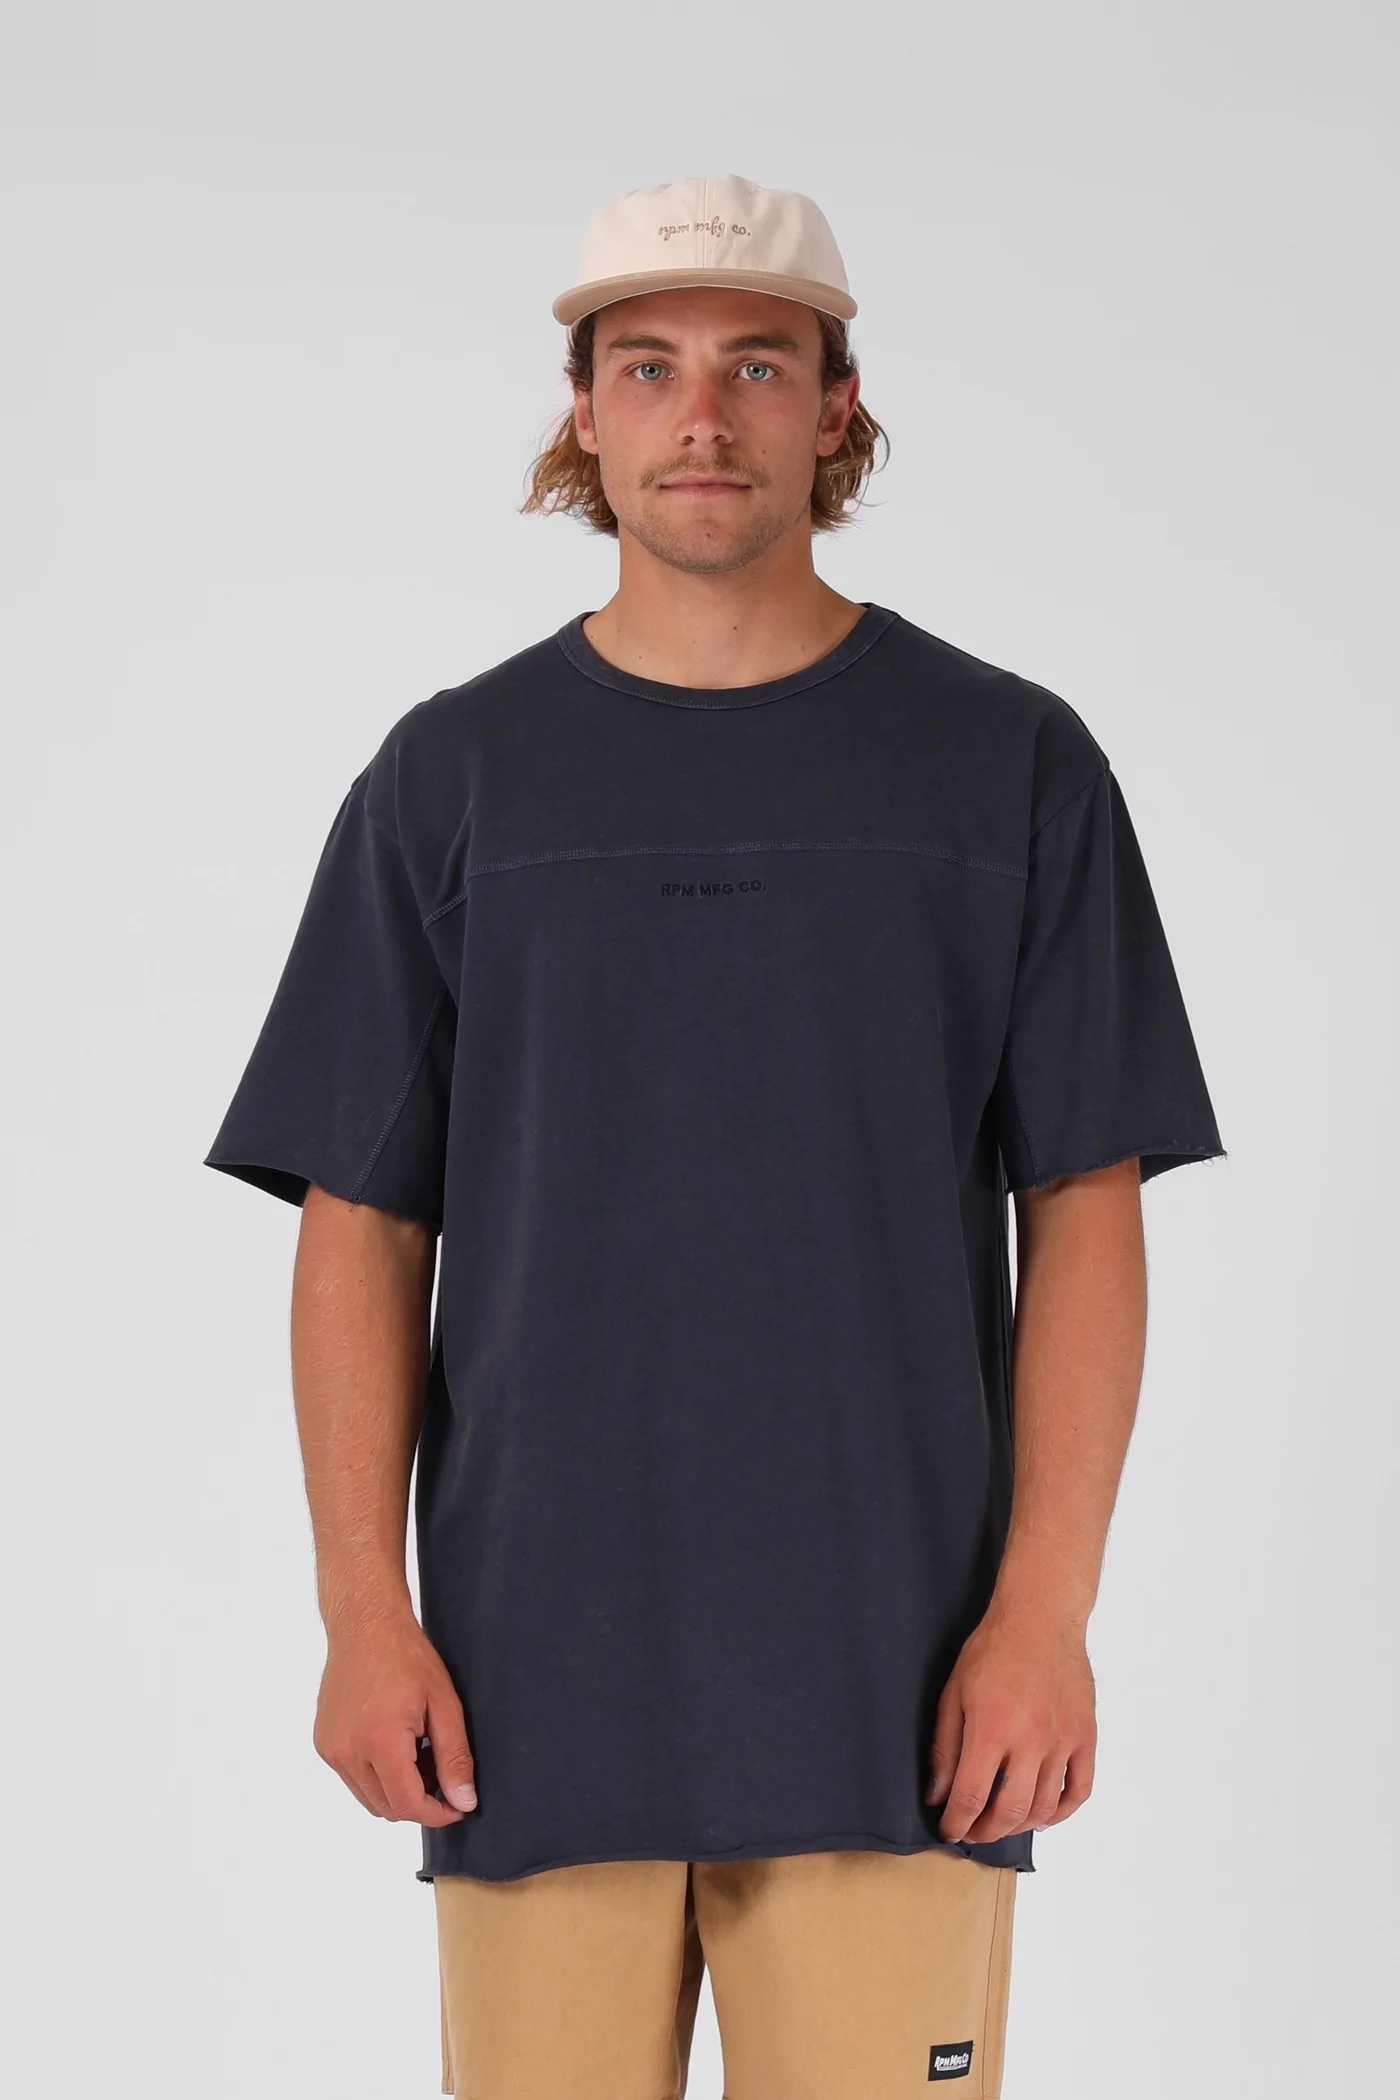 RPM - Terry Tee - Mens-Tops : We stock the very latest in Surf, Street ...